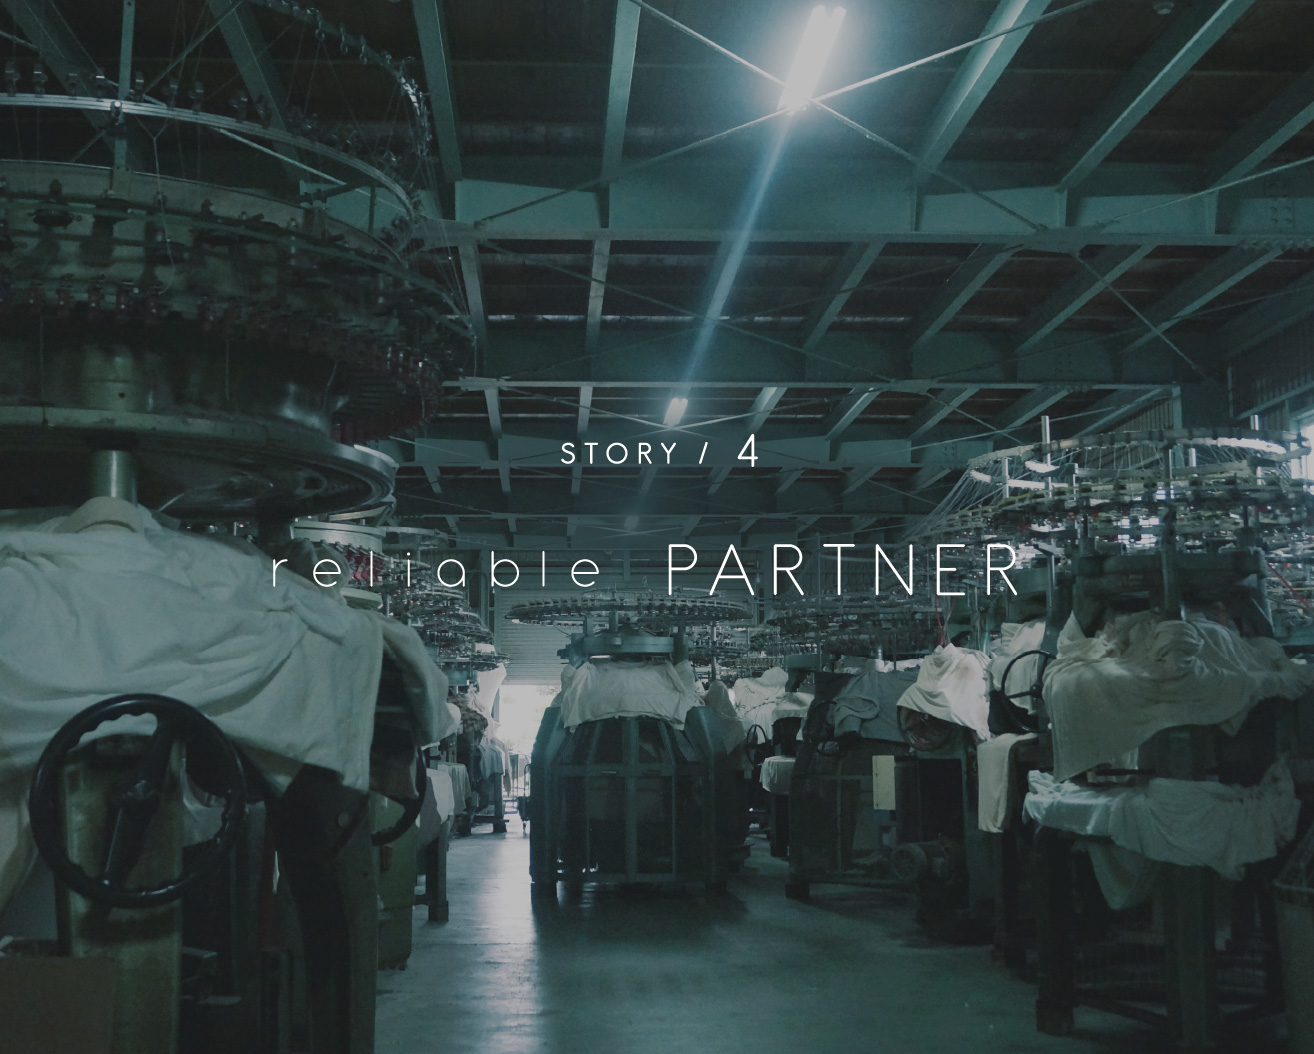 STORY4 / reliable PARTNER